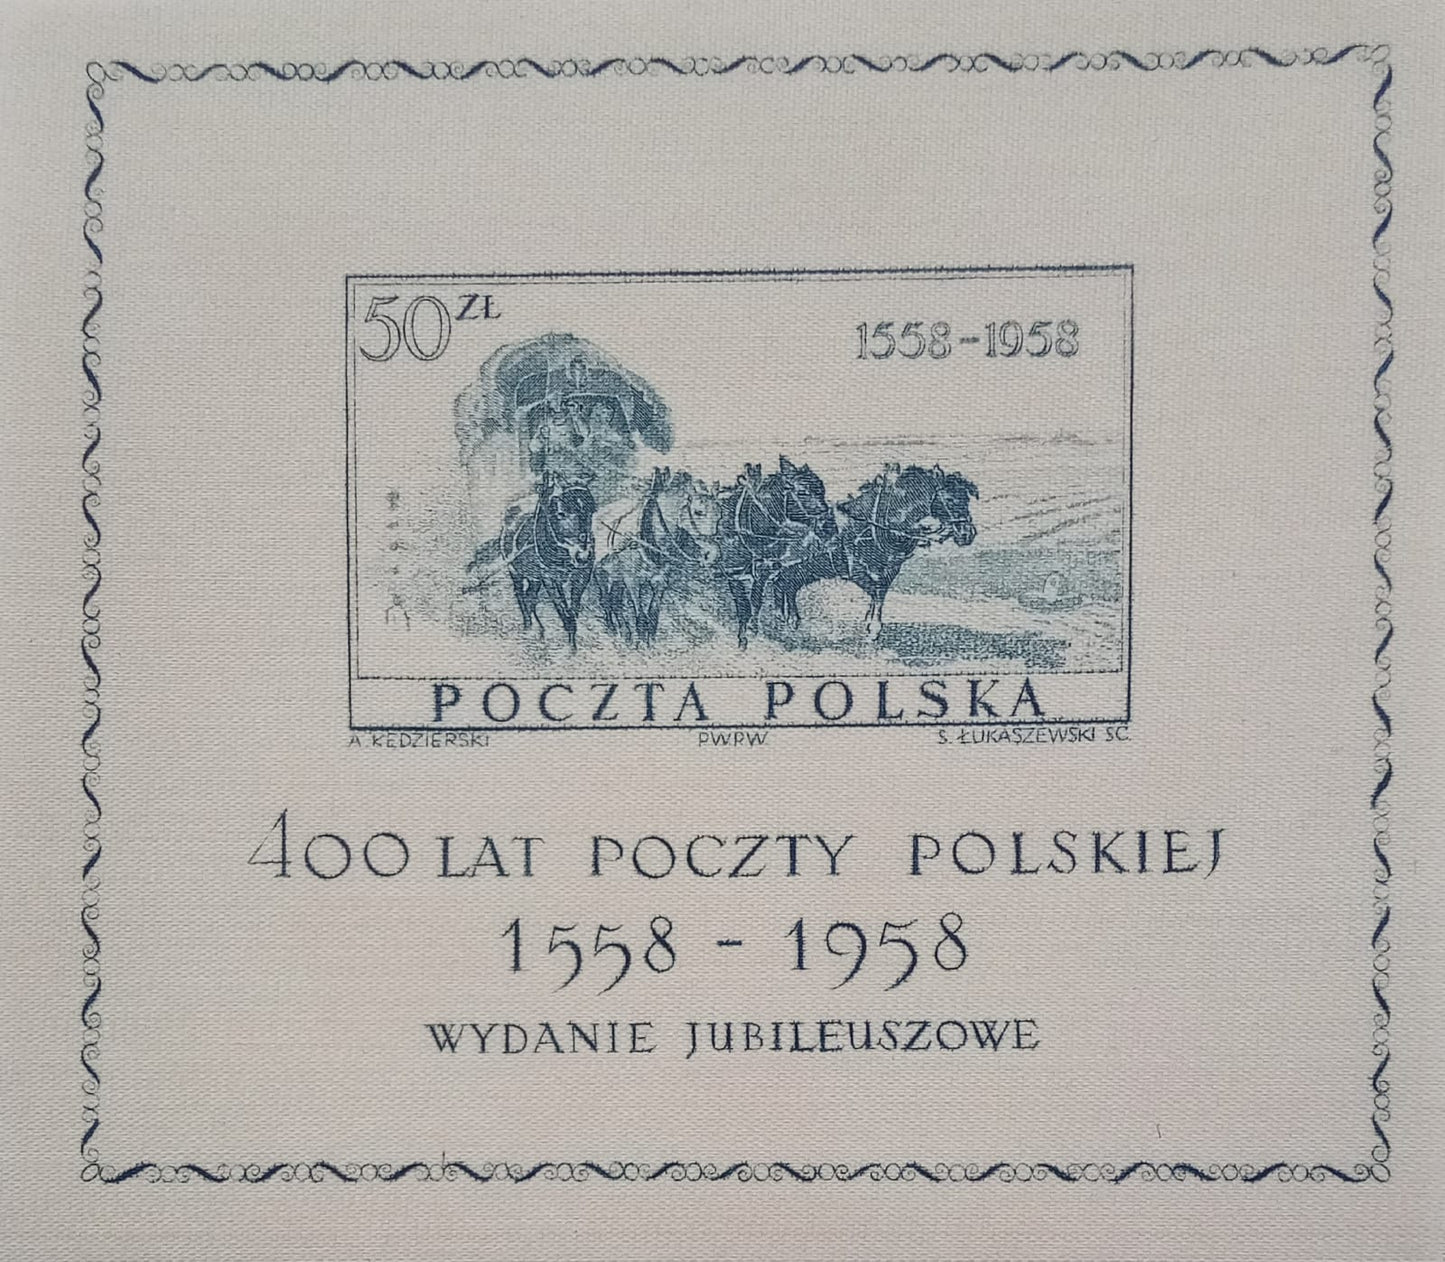 World's first silk stamp issued from Poland in 1958